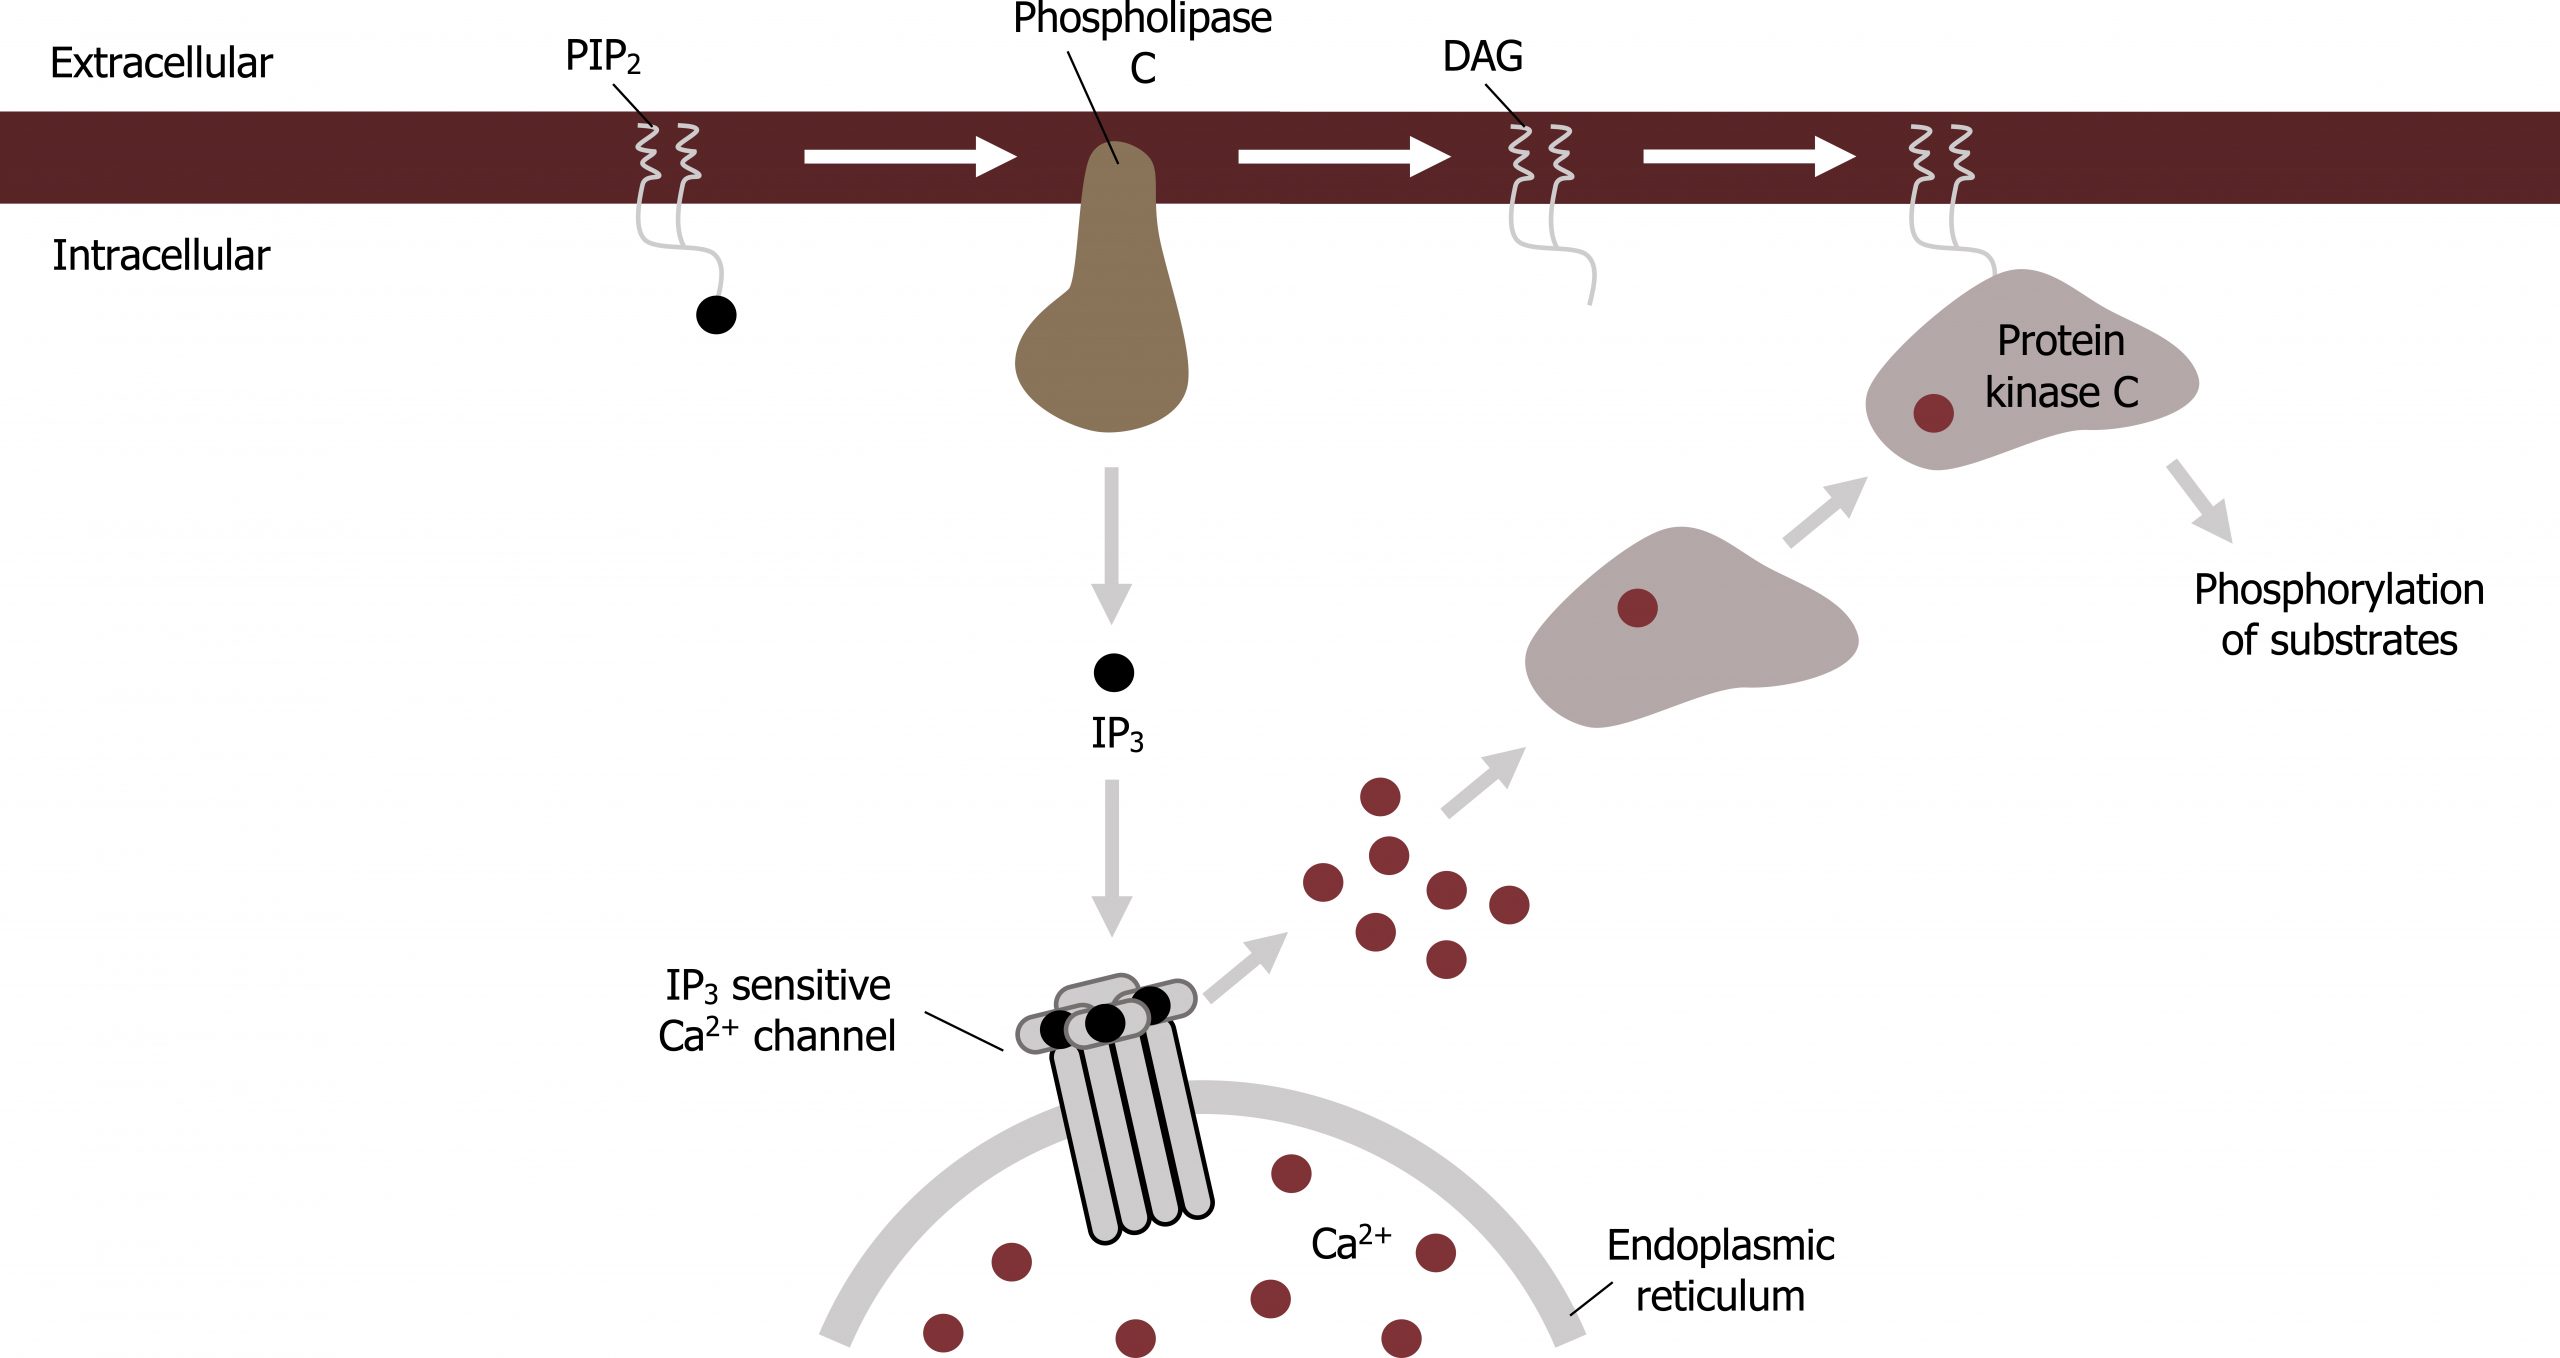 Membrane separating the extracellular and intracellular spaces contains from left to right PIP2, Phospholipase C, DAG, protein kinase C. Phospholipase C emits IP3 which binds to an IP3 sensitive Ca2+ channel embedded in the endoplasmic reticulum. Calcium is sent out of the ER as second messengers in a signaling cascade to Protein kinase C and then completes phosphorylation of substrates.